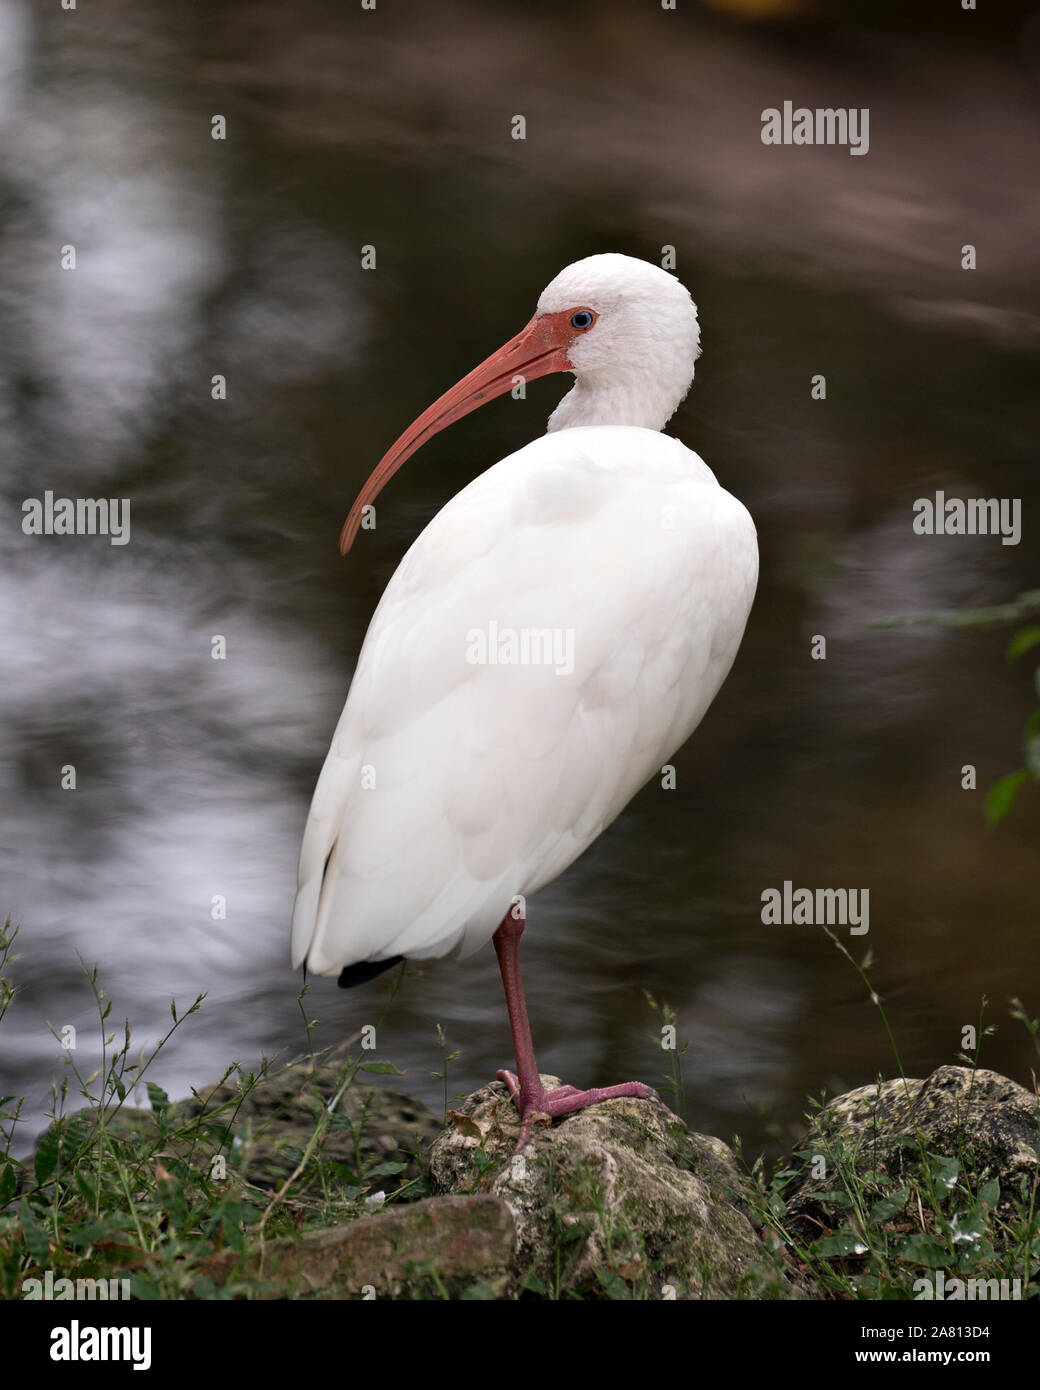 White Ibis bird by the water sitting on a rock and exposing its body, head, eye, orange beak, neck, feet  in its environment  with a bokeh background. Stock Photo